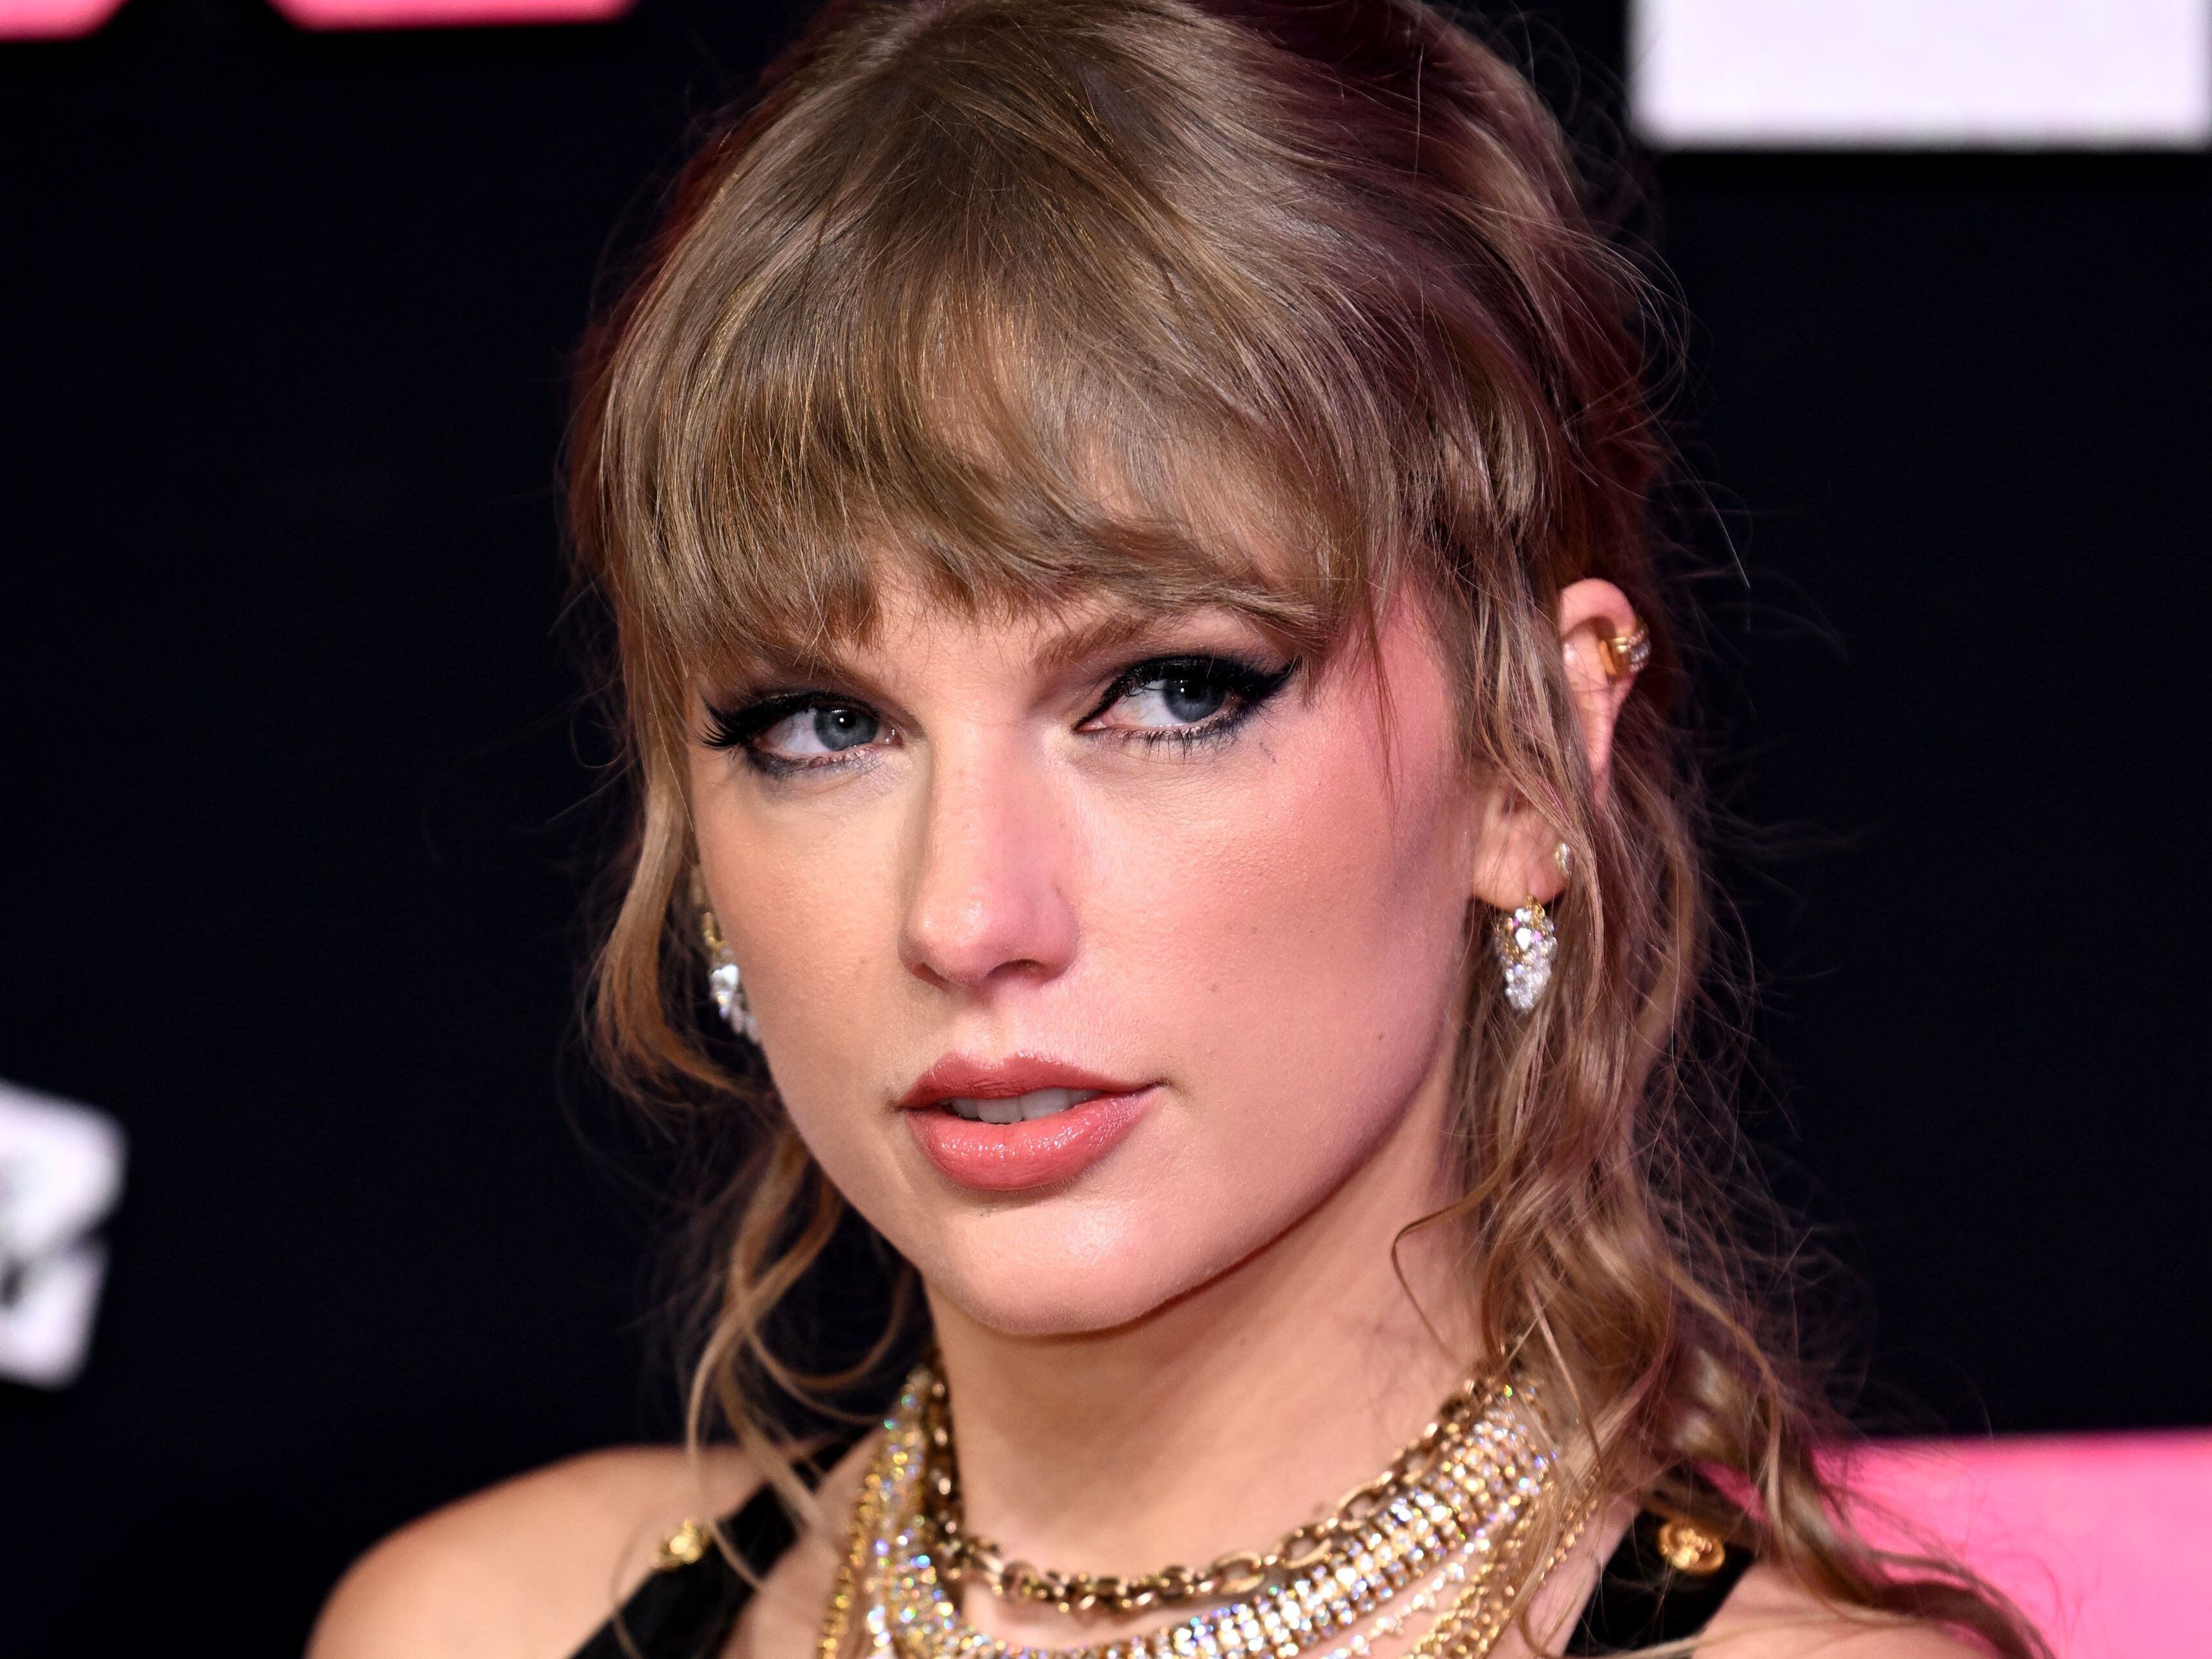 Man held near Taylor Swift’s New York townhouse after reported break-in attempt